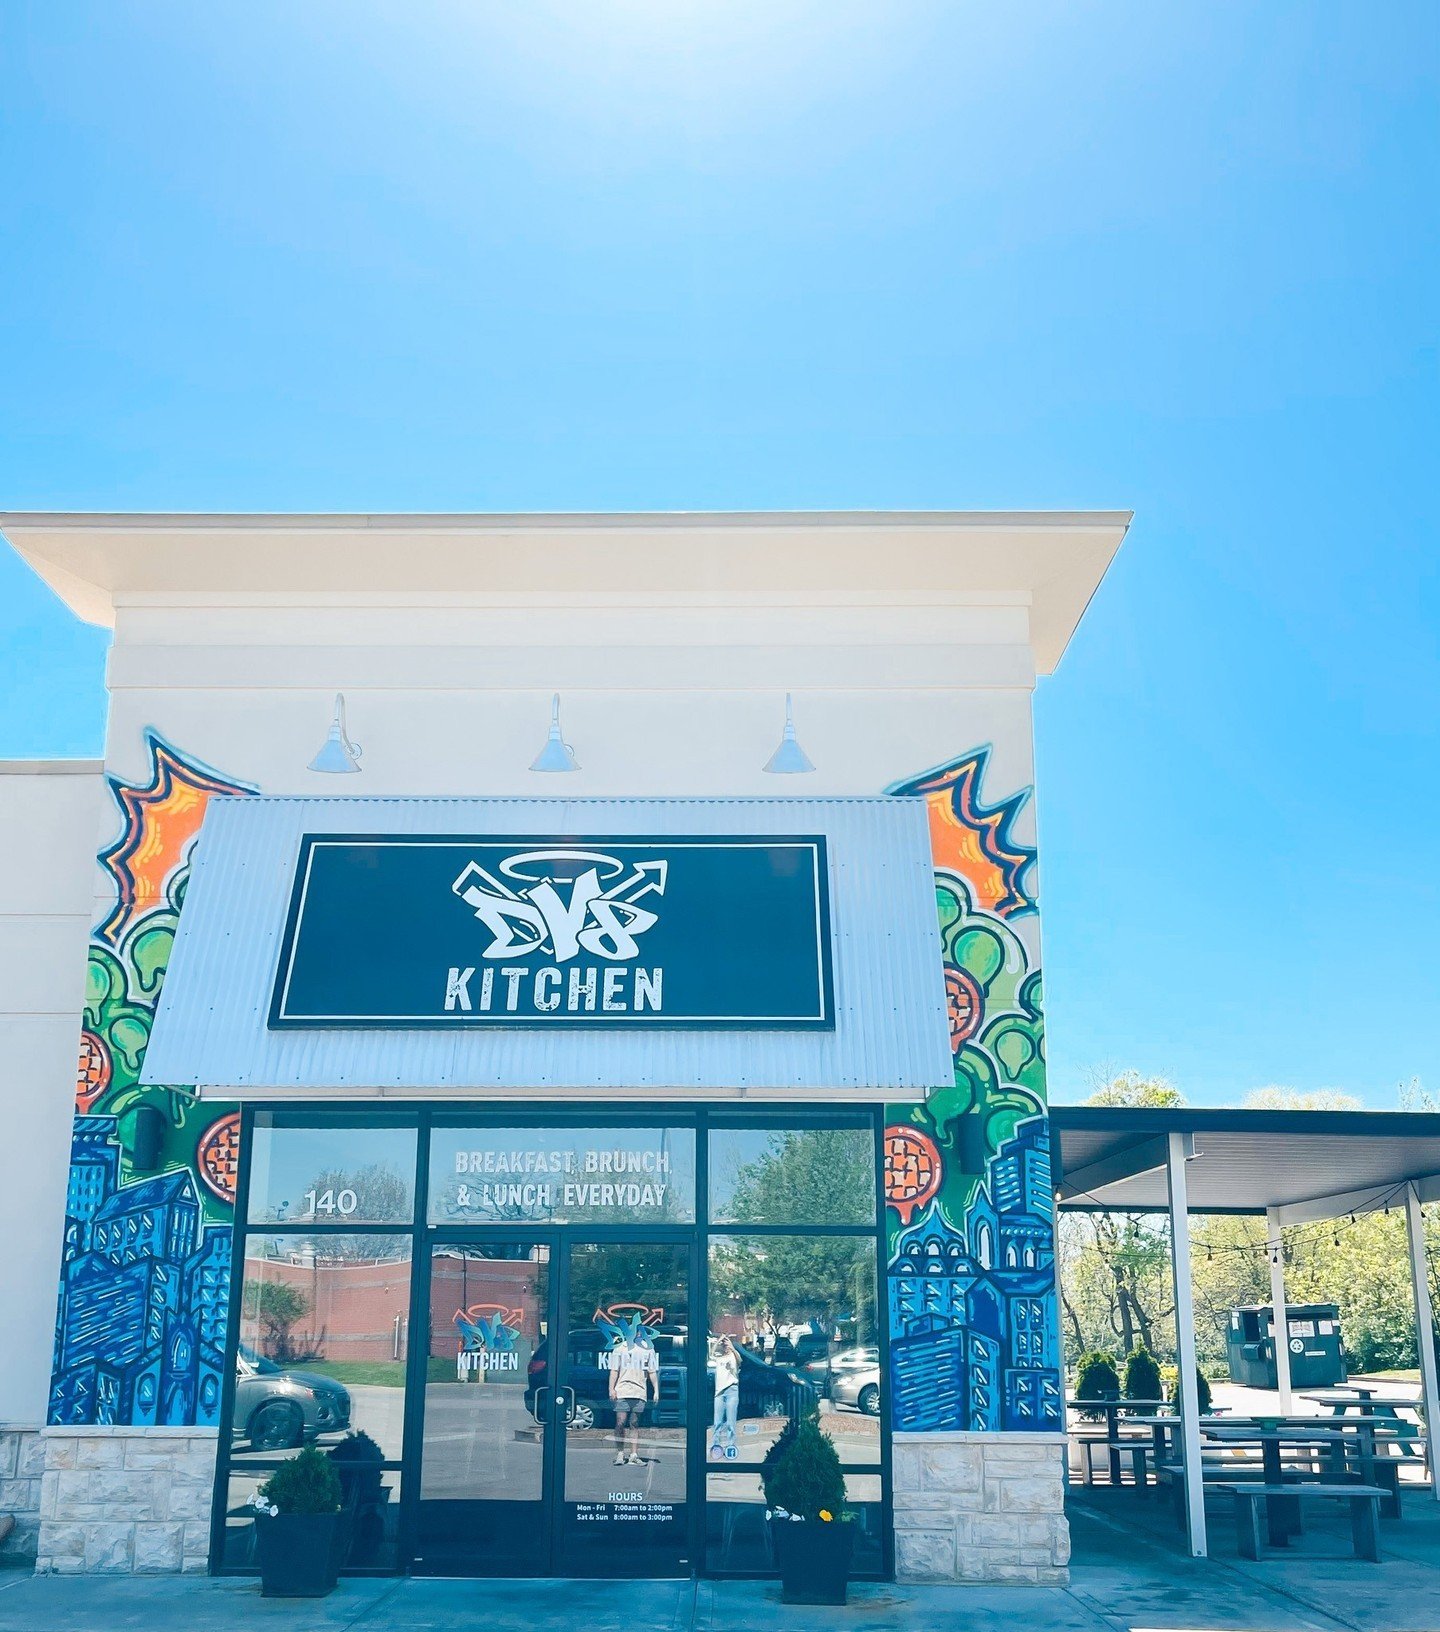 ✨️What's around Wednesday✨️⁠
⁠
Let's talk about our favorite spot this week - DV8 Kitchen! It's the perfect place for a delicious brunch, just a walk away from Signature and UK's campus. Go check out @dv8kitchen! 🥞🥪